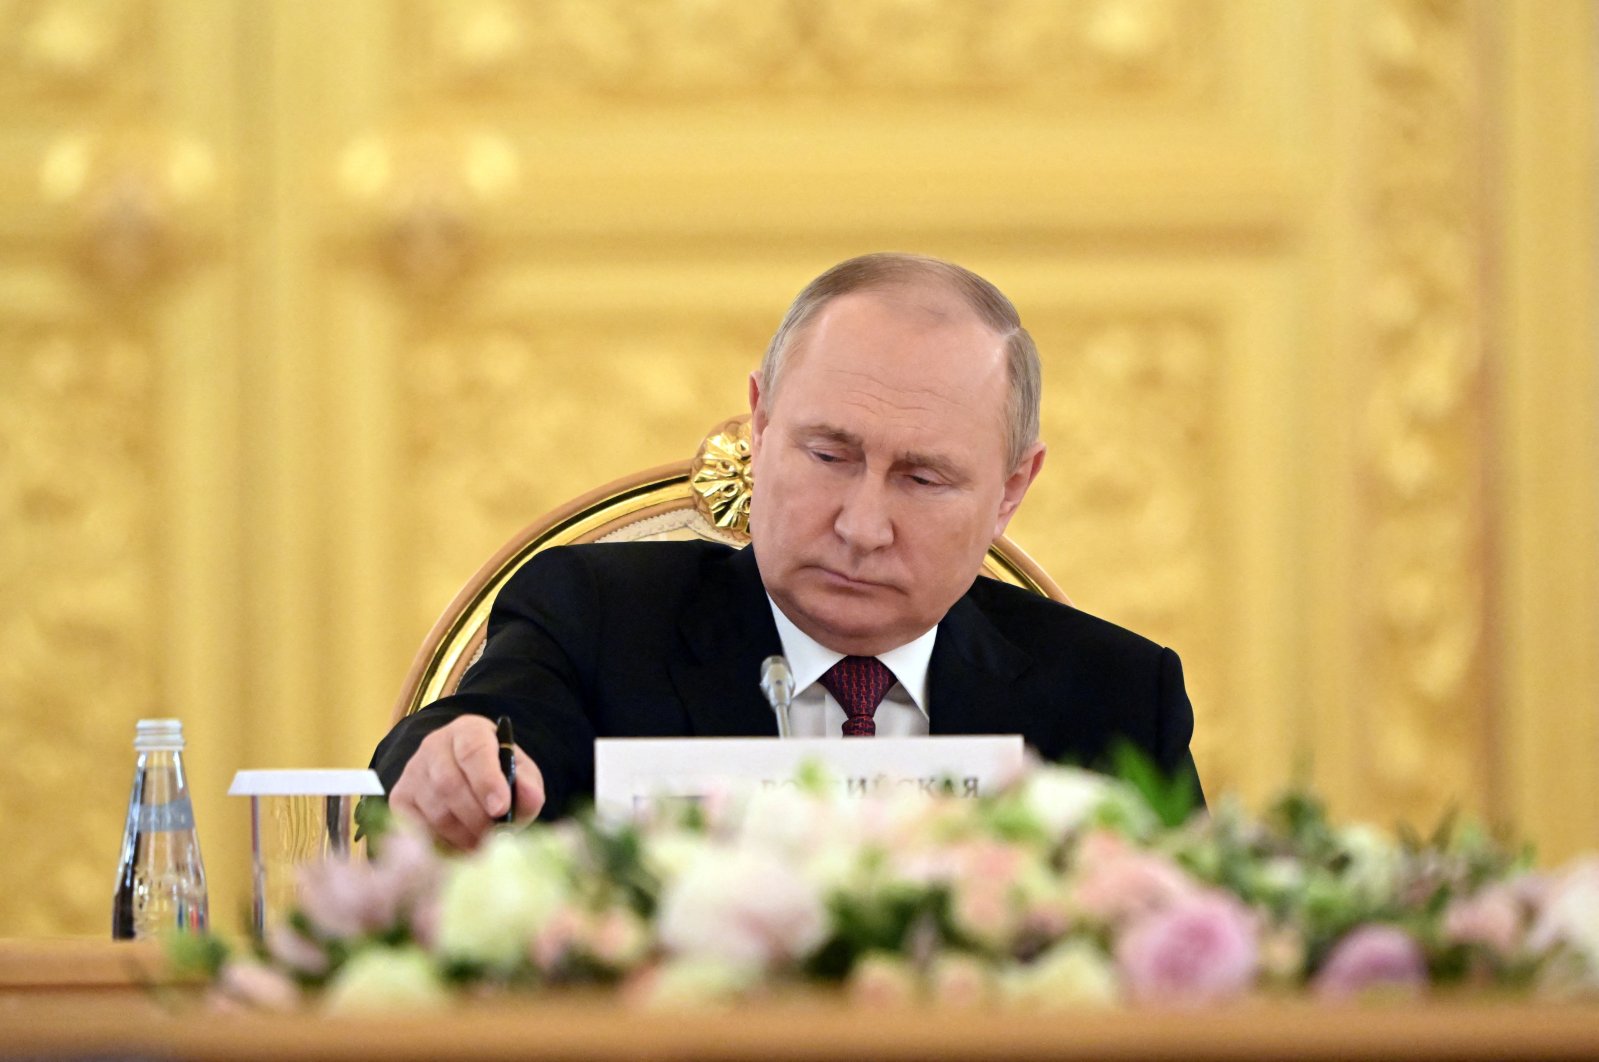 Russian President Vladimir Putin attends a summit at the Kremlin in Moscow, Russia, May 16, 2022. (Reuters Photo)